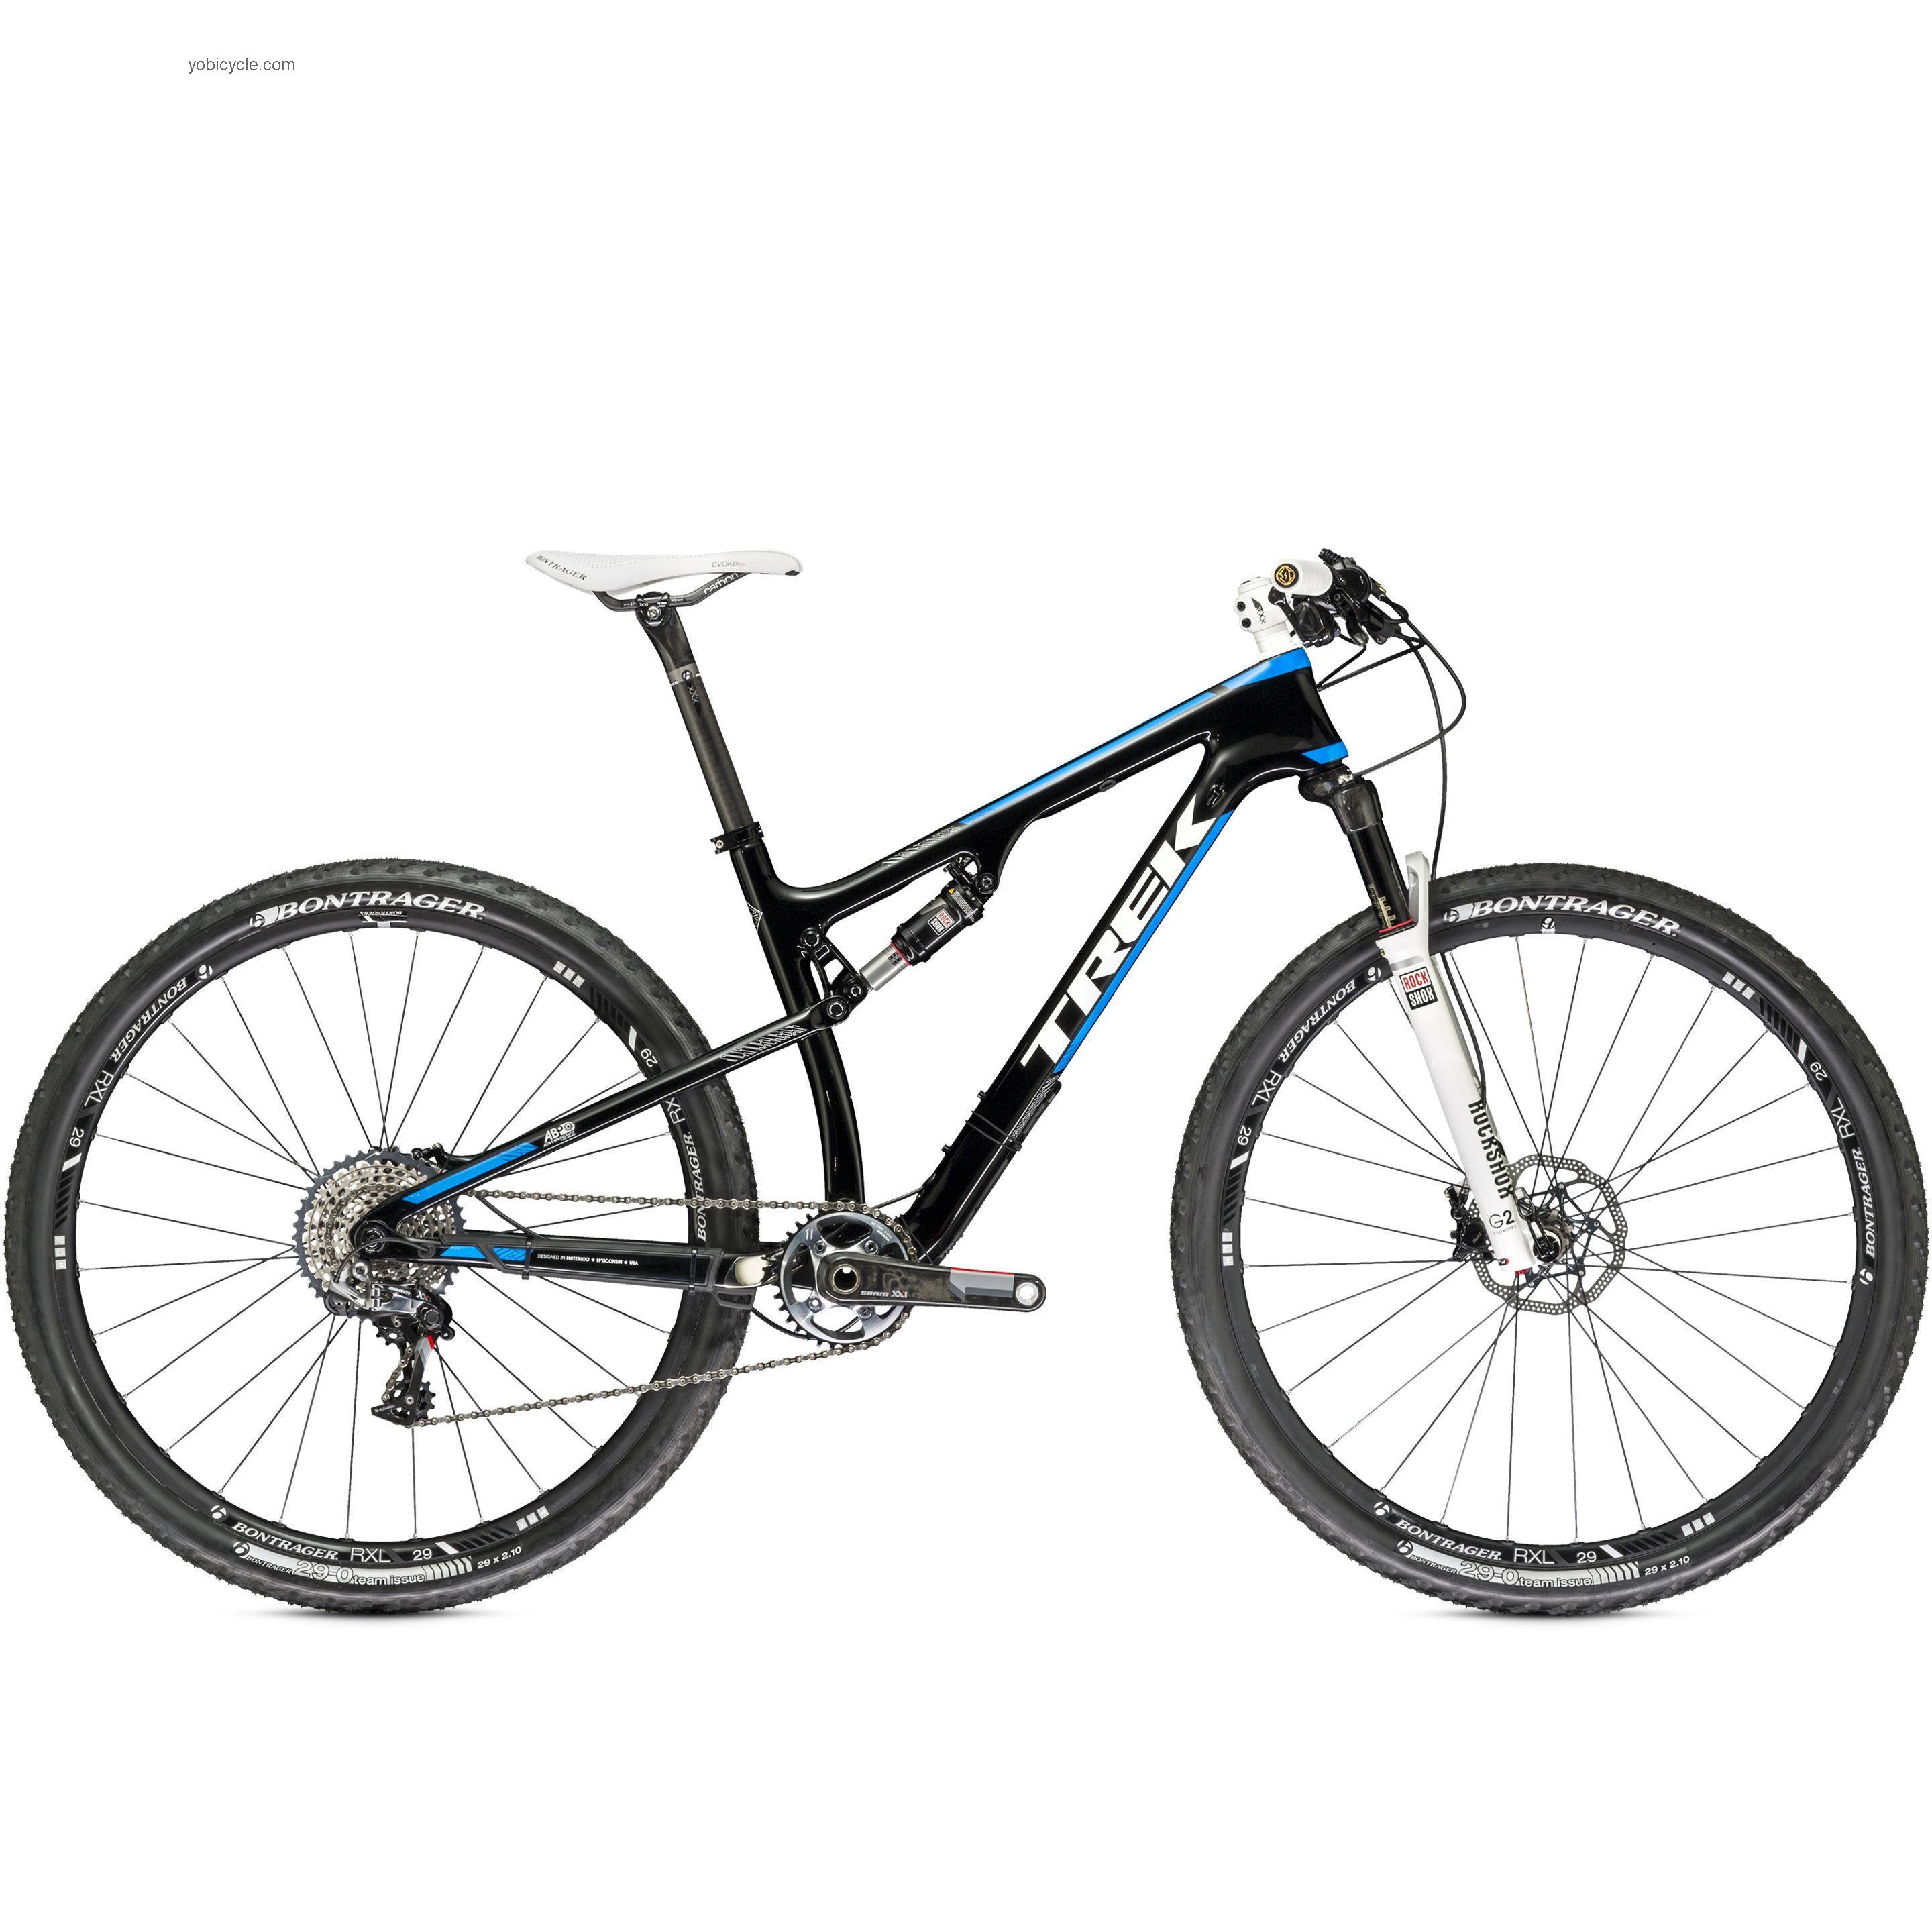 Trek Superfly FS 9.9 SL X competitors and comparison tool online specs and performance